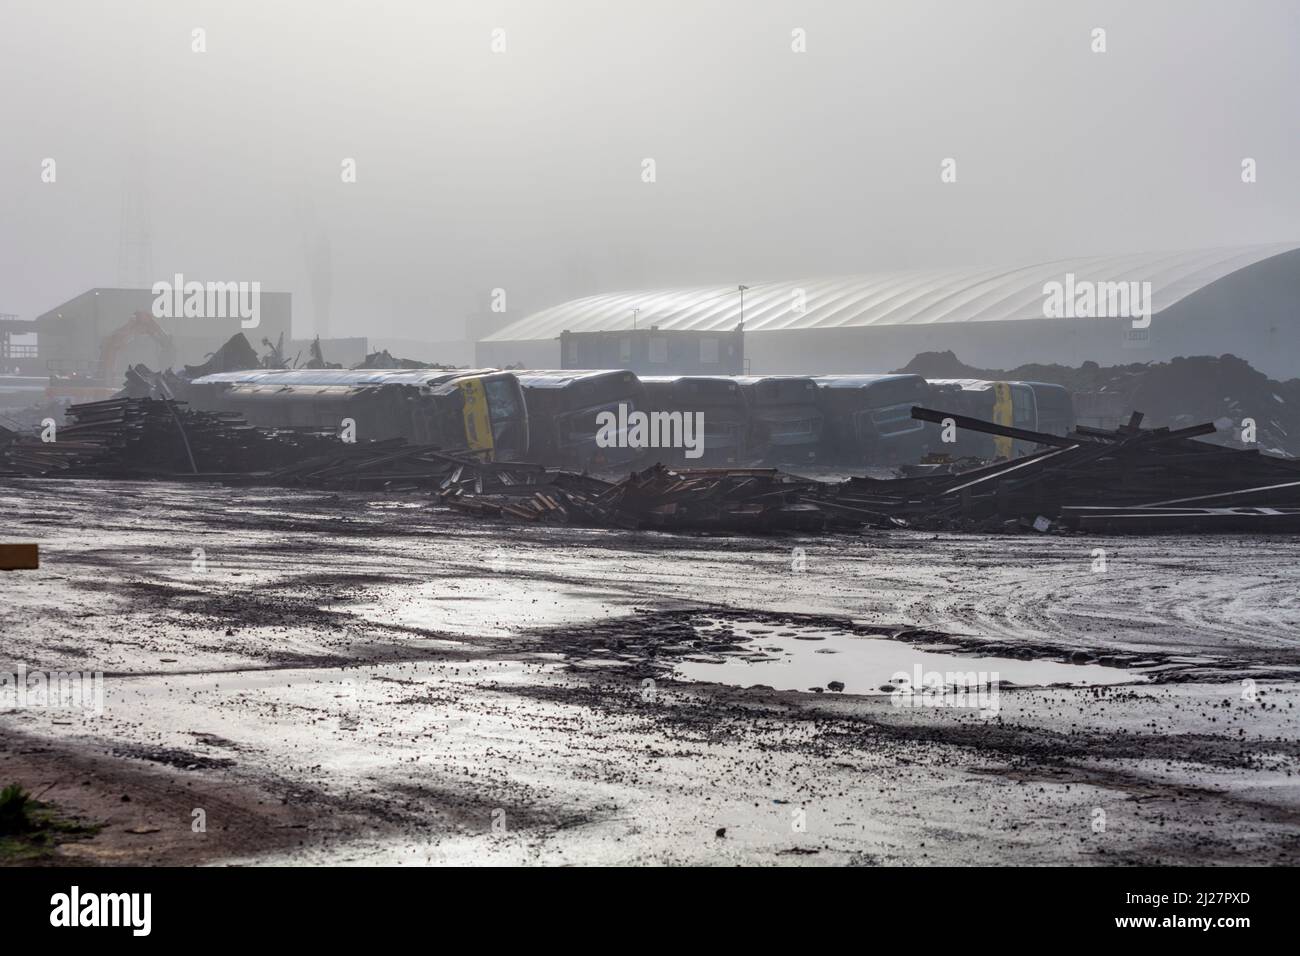 Withdrawn class 365 electric commuter trains on their sides waiting to be cut up for scrap at SIMS metals, Newport docks total destruction order. Stock Photo